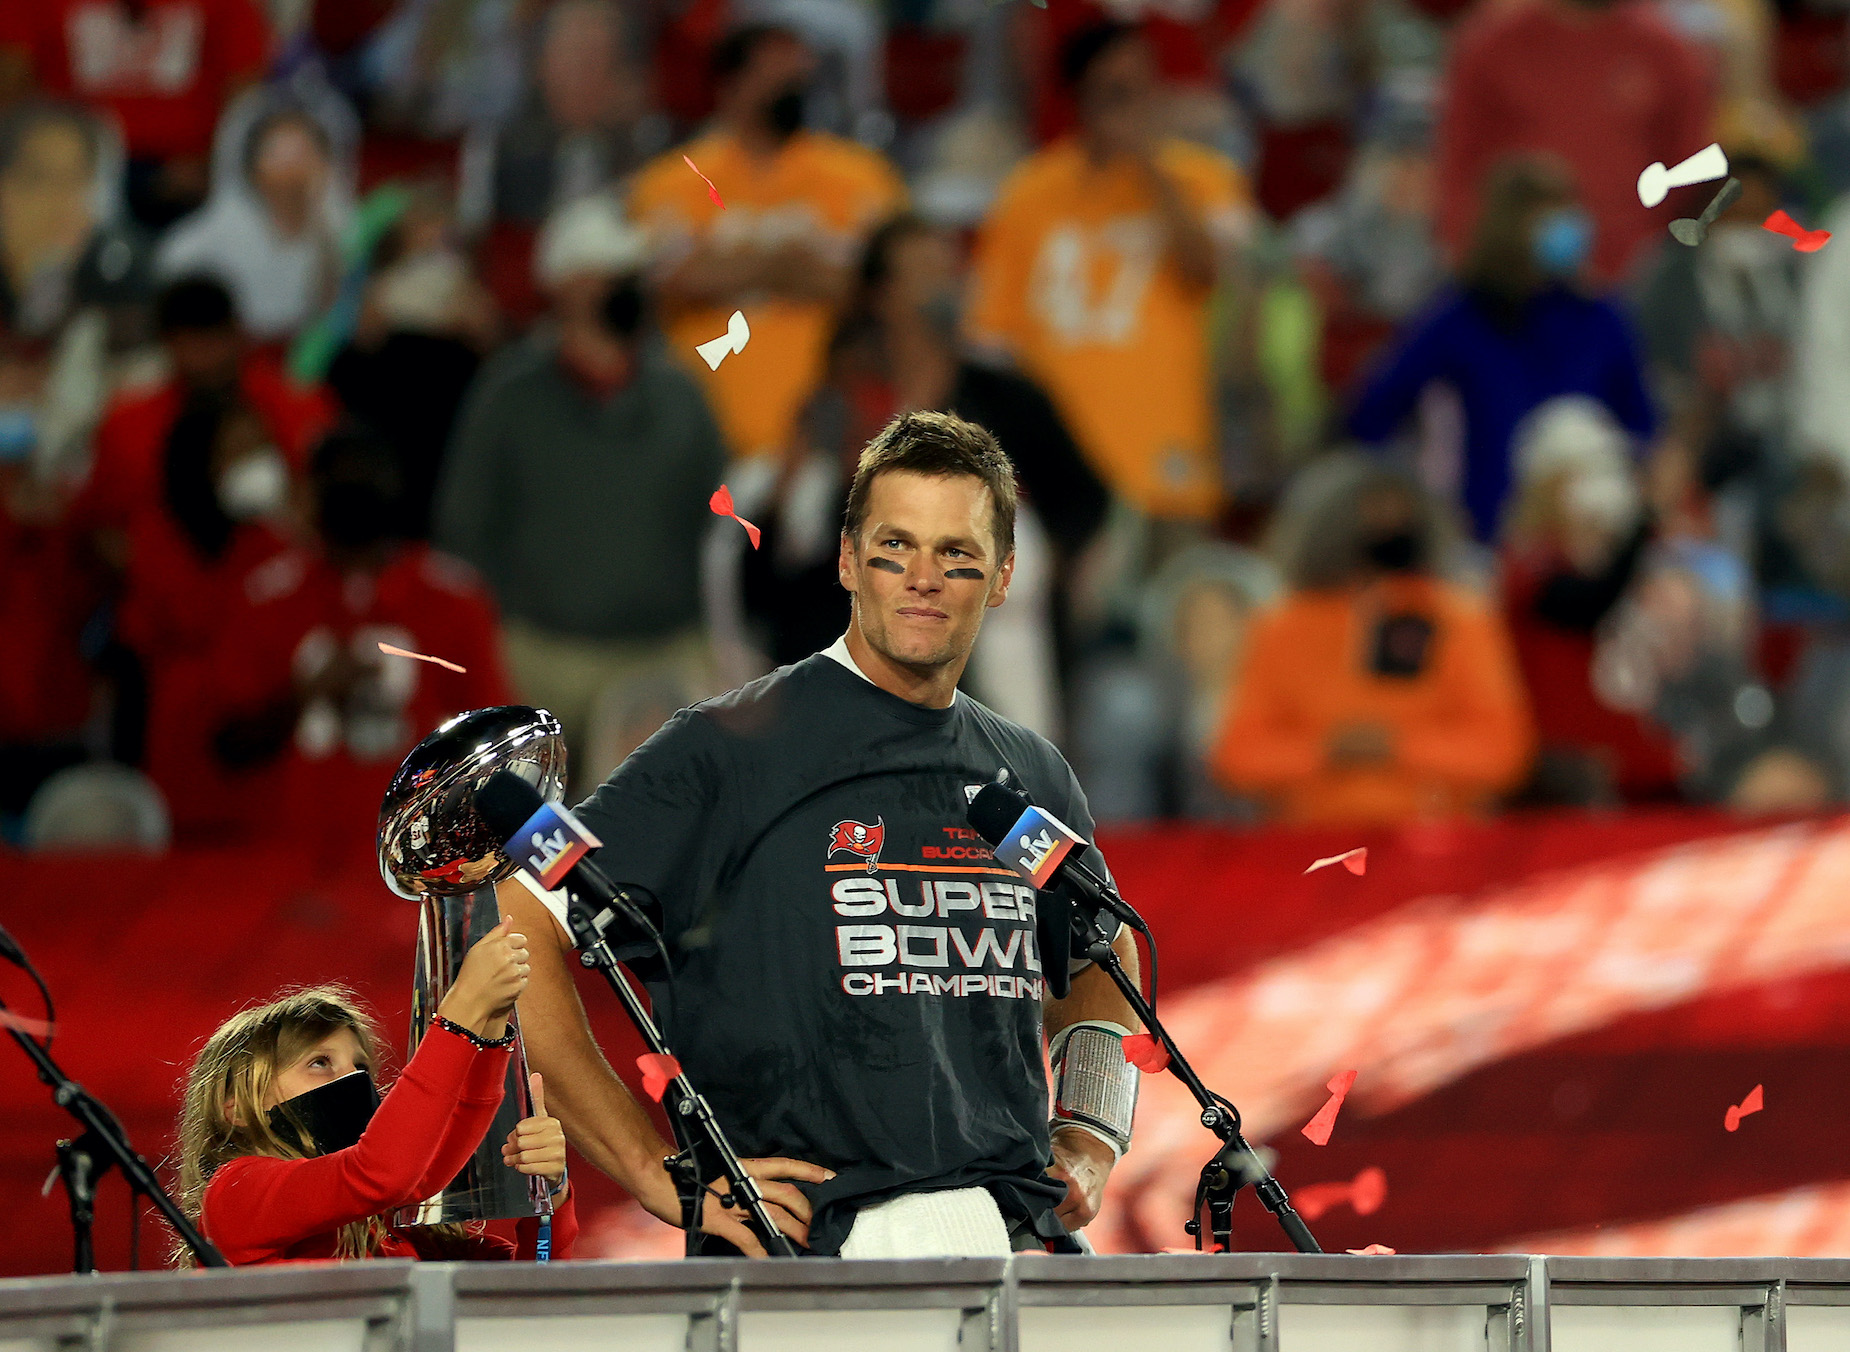 Tom Brady faces the media after leading the Tampa Bay Buccaneers to victory in Super Bowl 55.